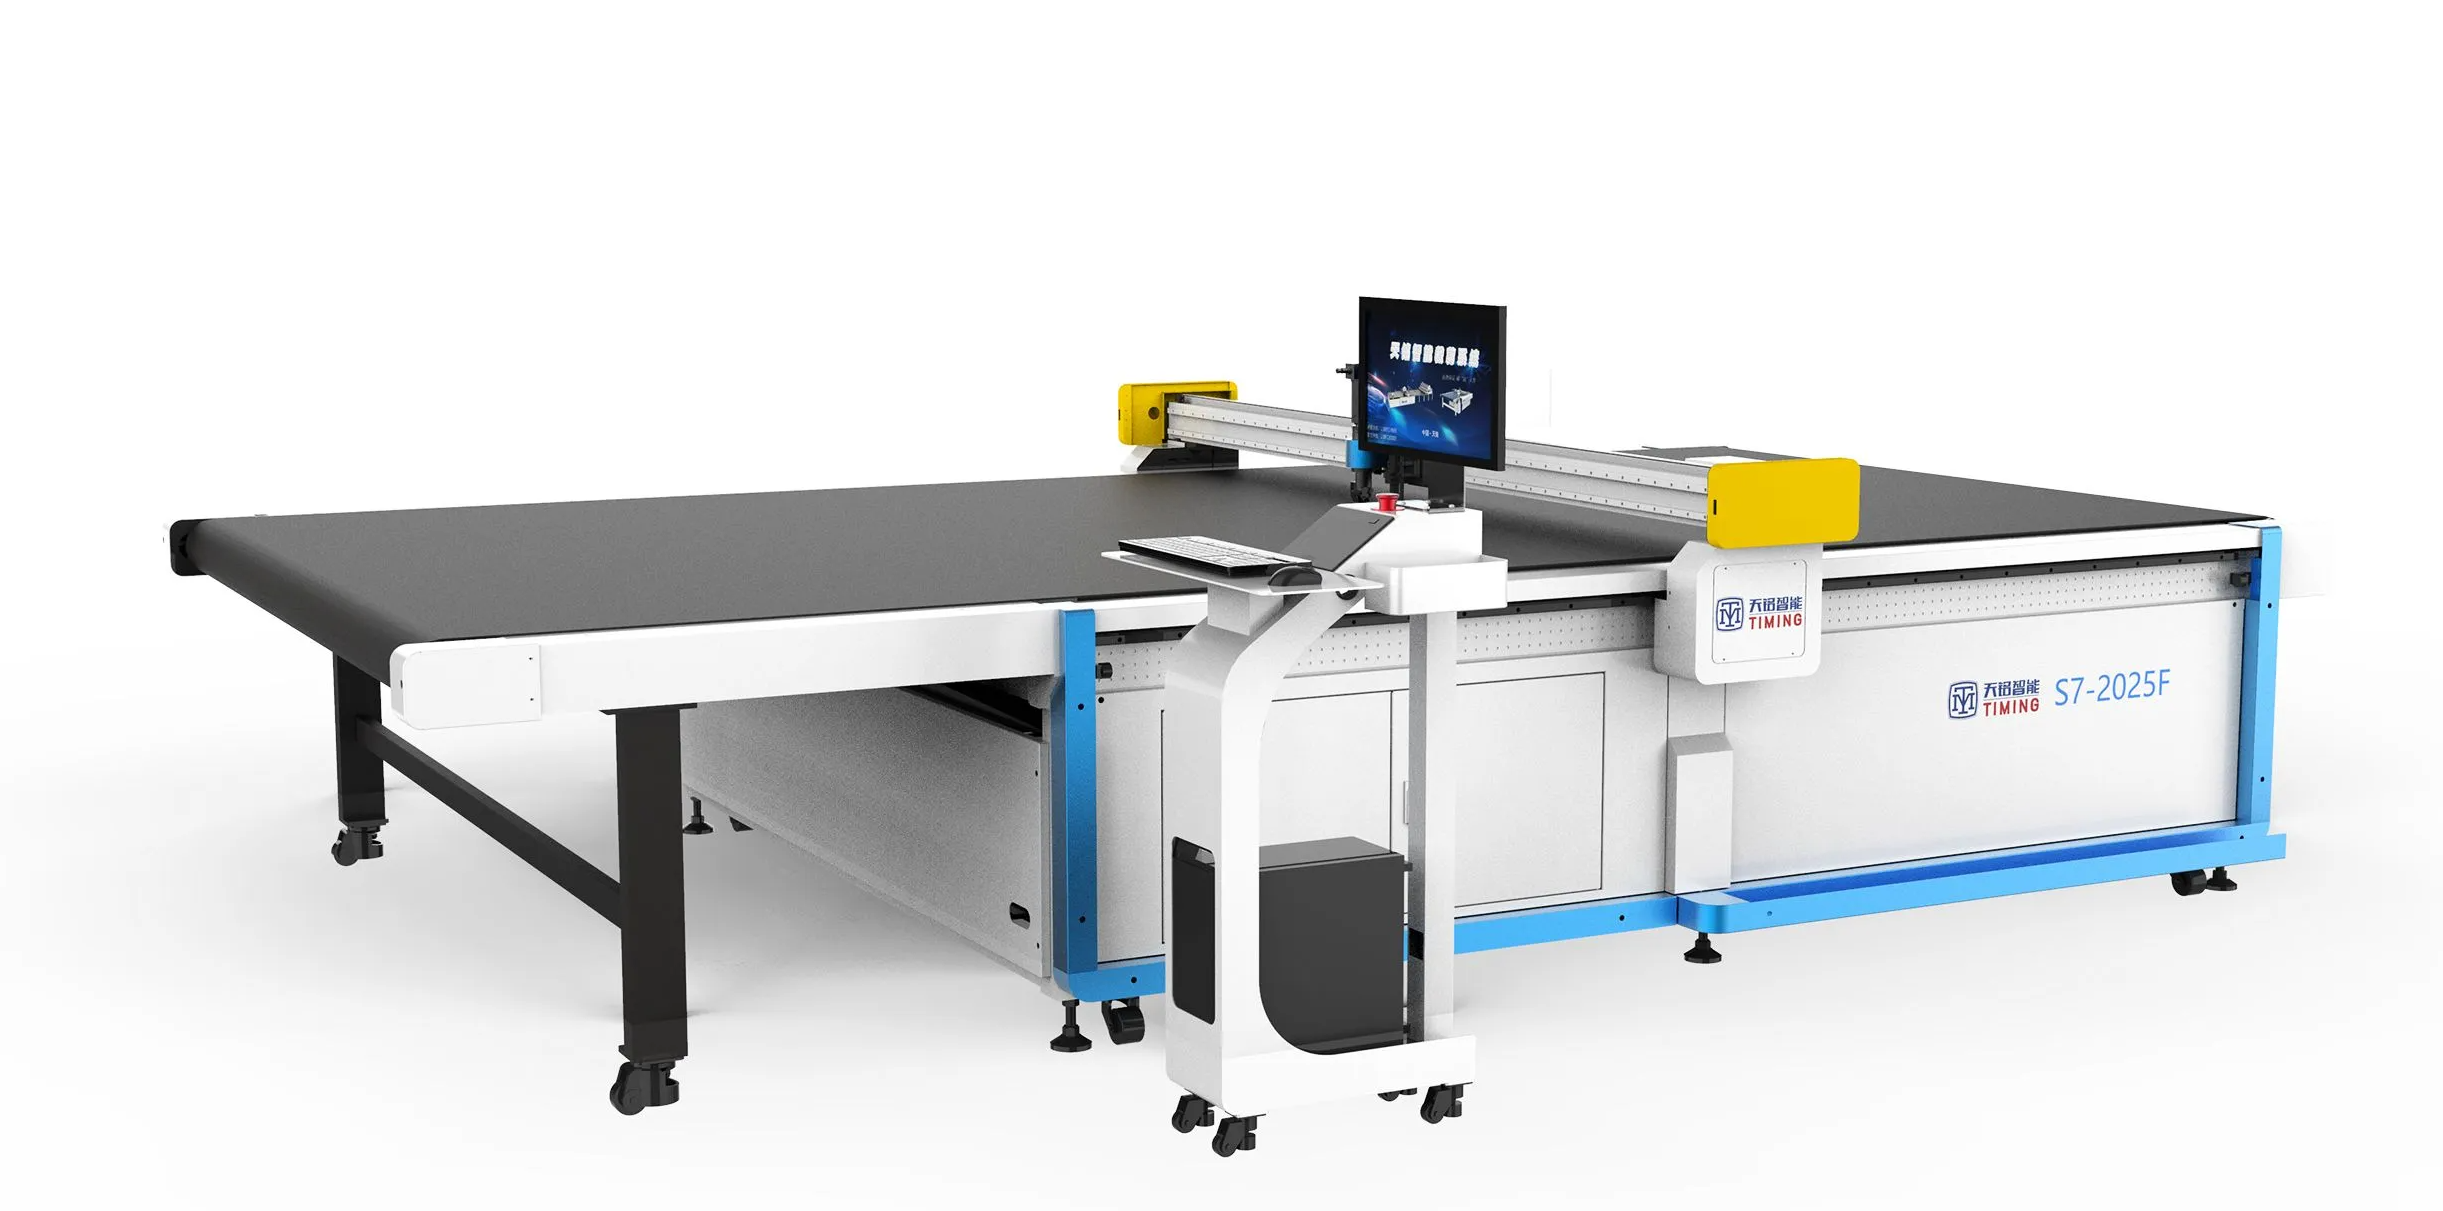 Reasons for choosing our computerized fabric cutting machine